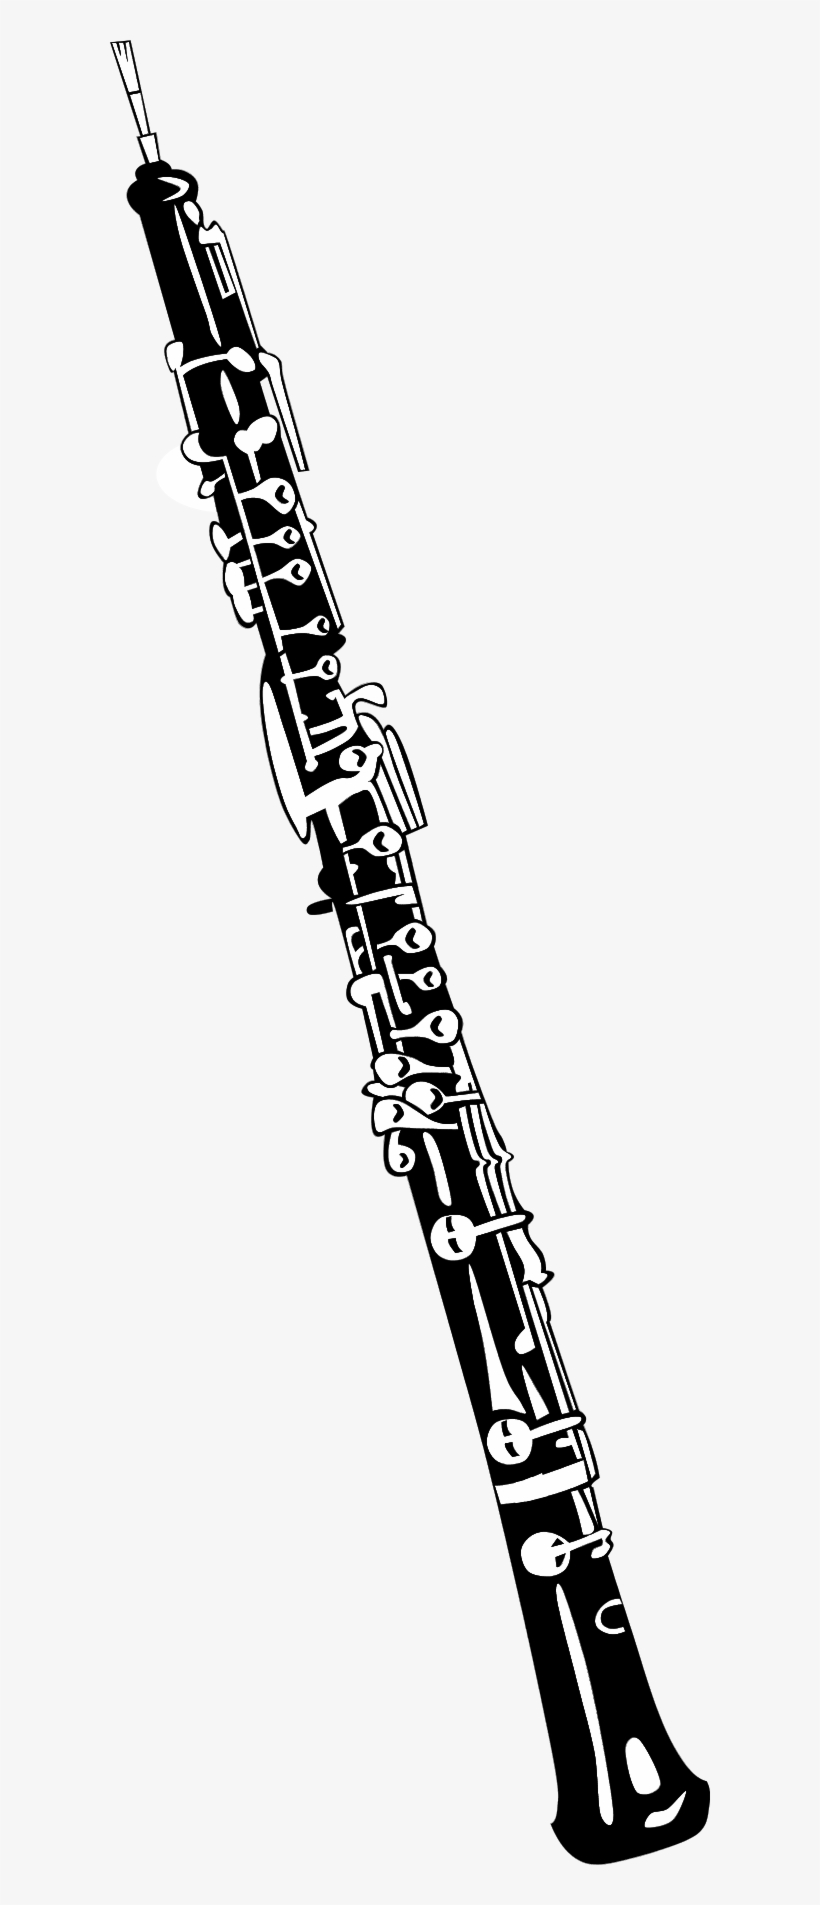 Bassoon - Oboe Clipart, transparent png #3123746